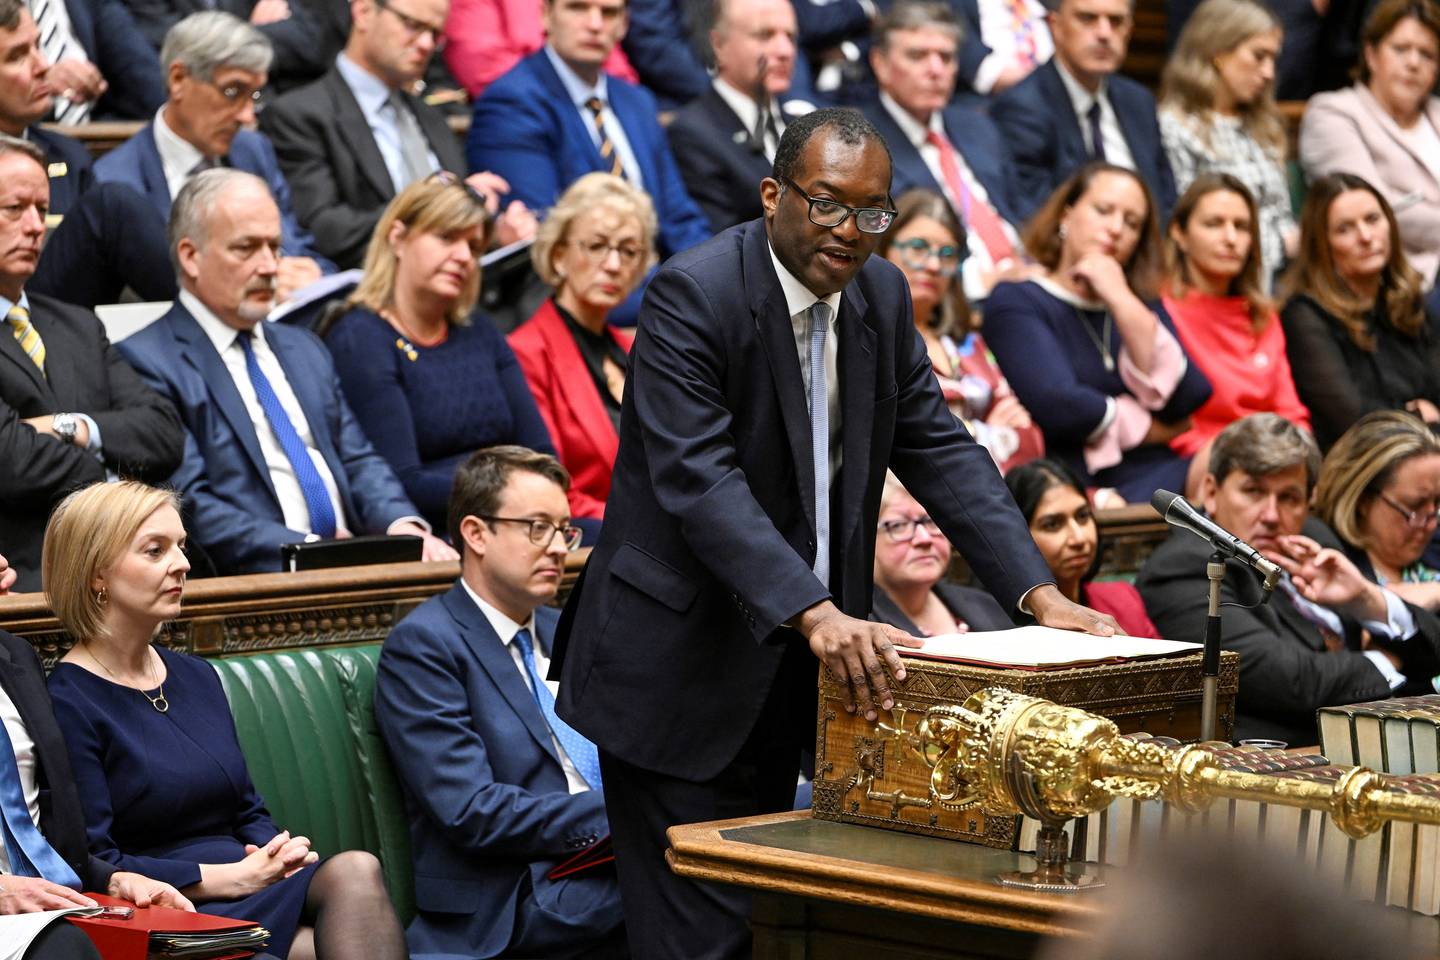 Chancellor of the Exchequer Kwasi Kwarteng delivers his mini-budget to the British Parliament on Friday. Reuters.